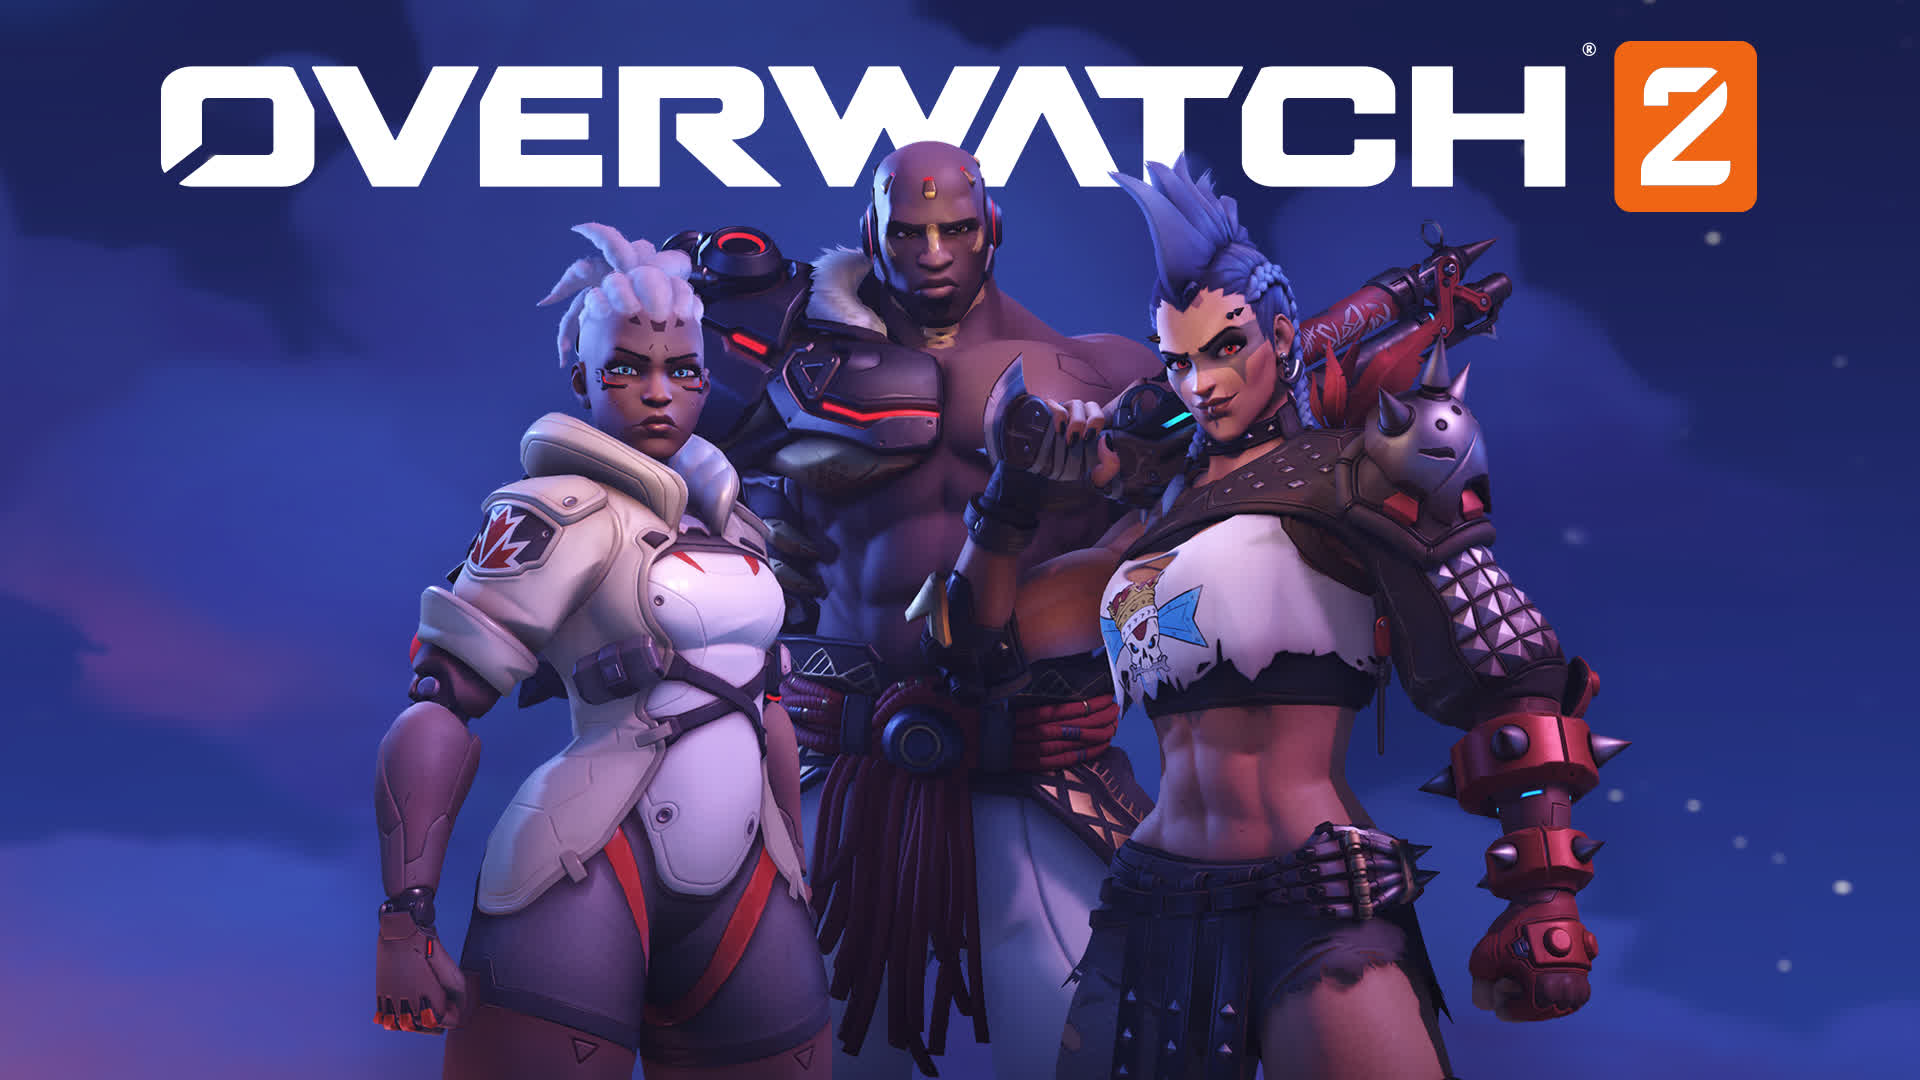 Overwatch 2 will replace Overwatch when it launches in October